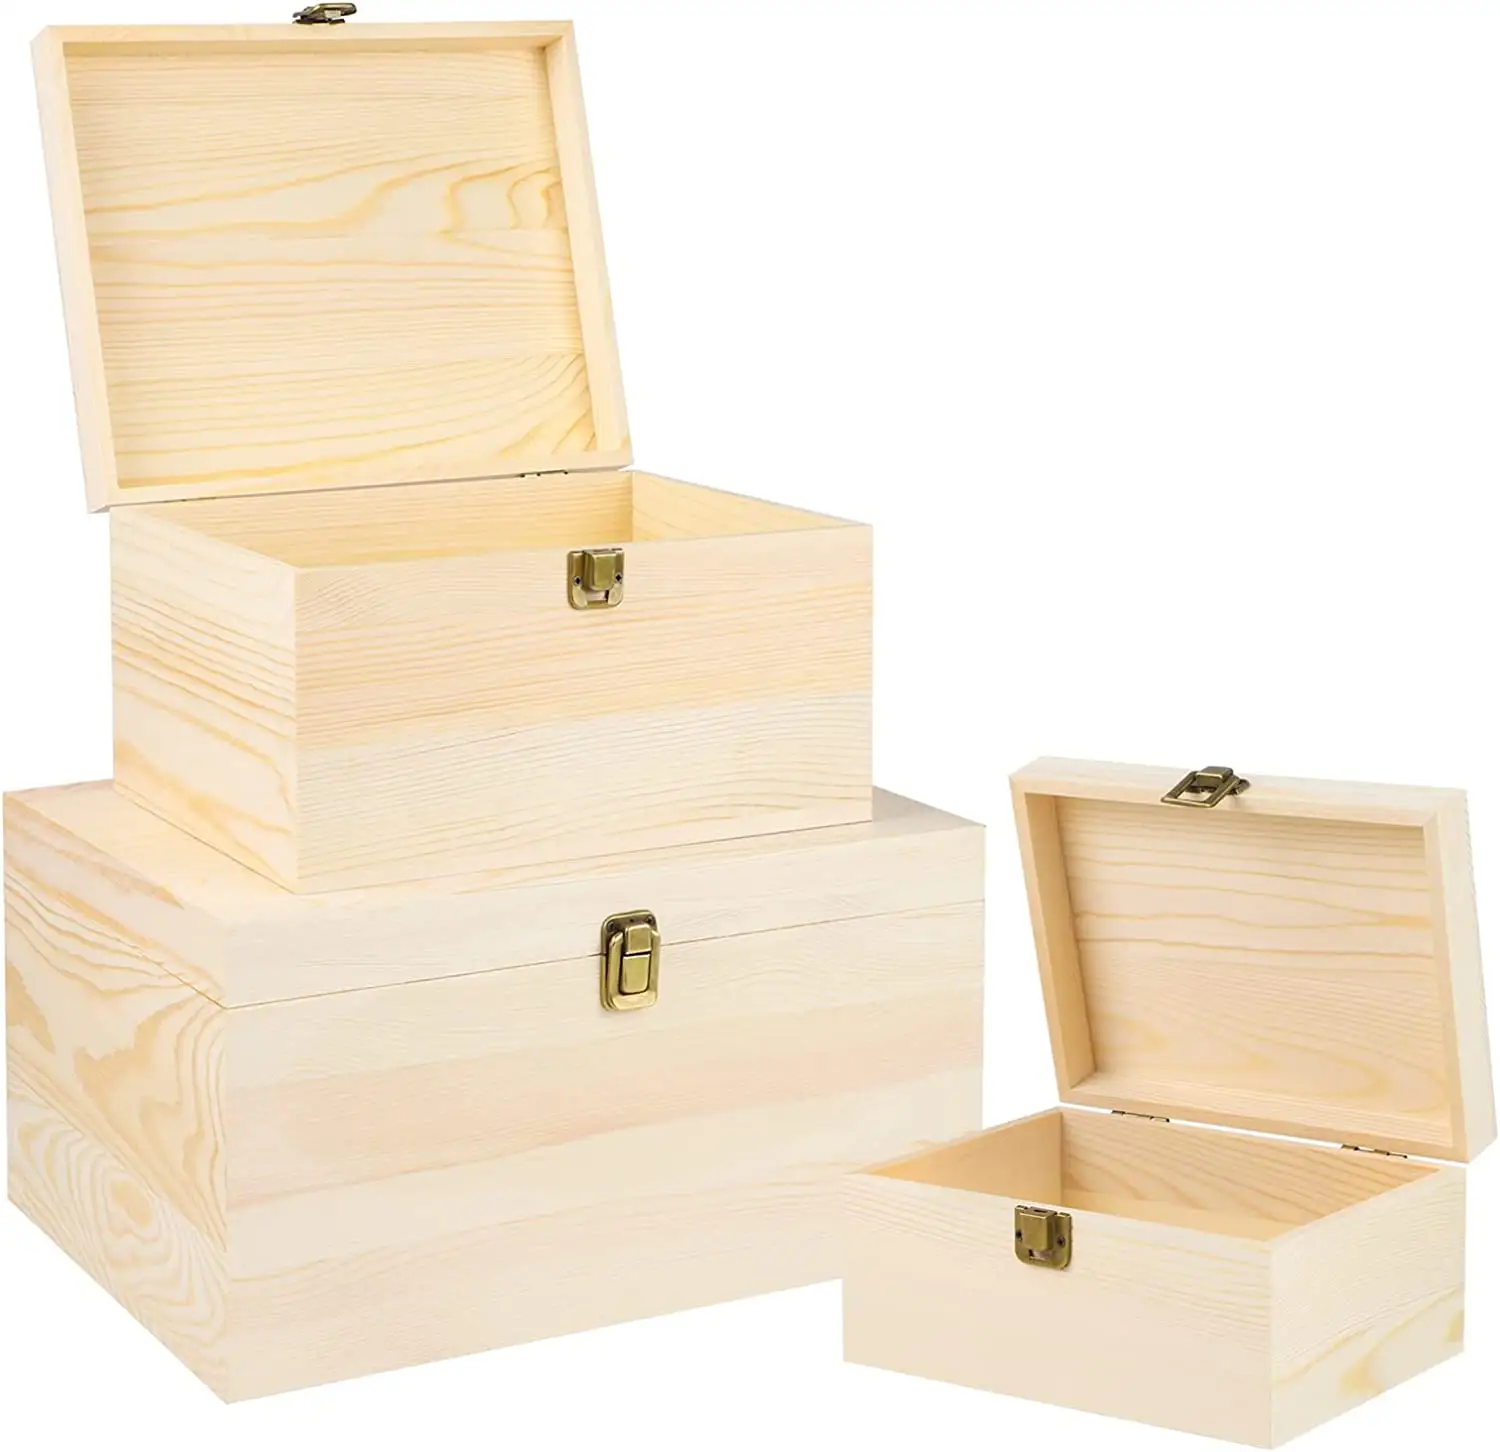 Hot sale 25 storage space organizers customized wooden storage box and hinge lid